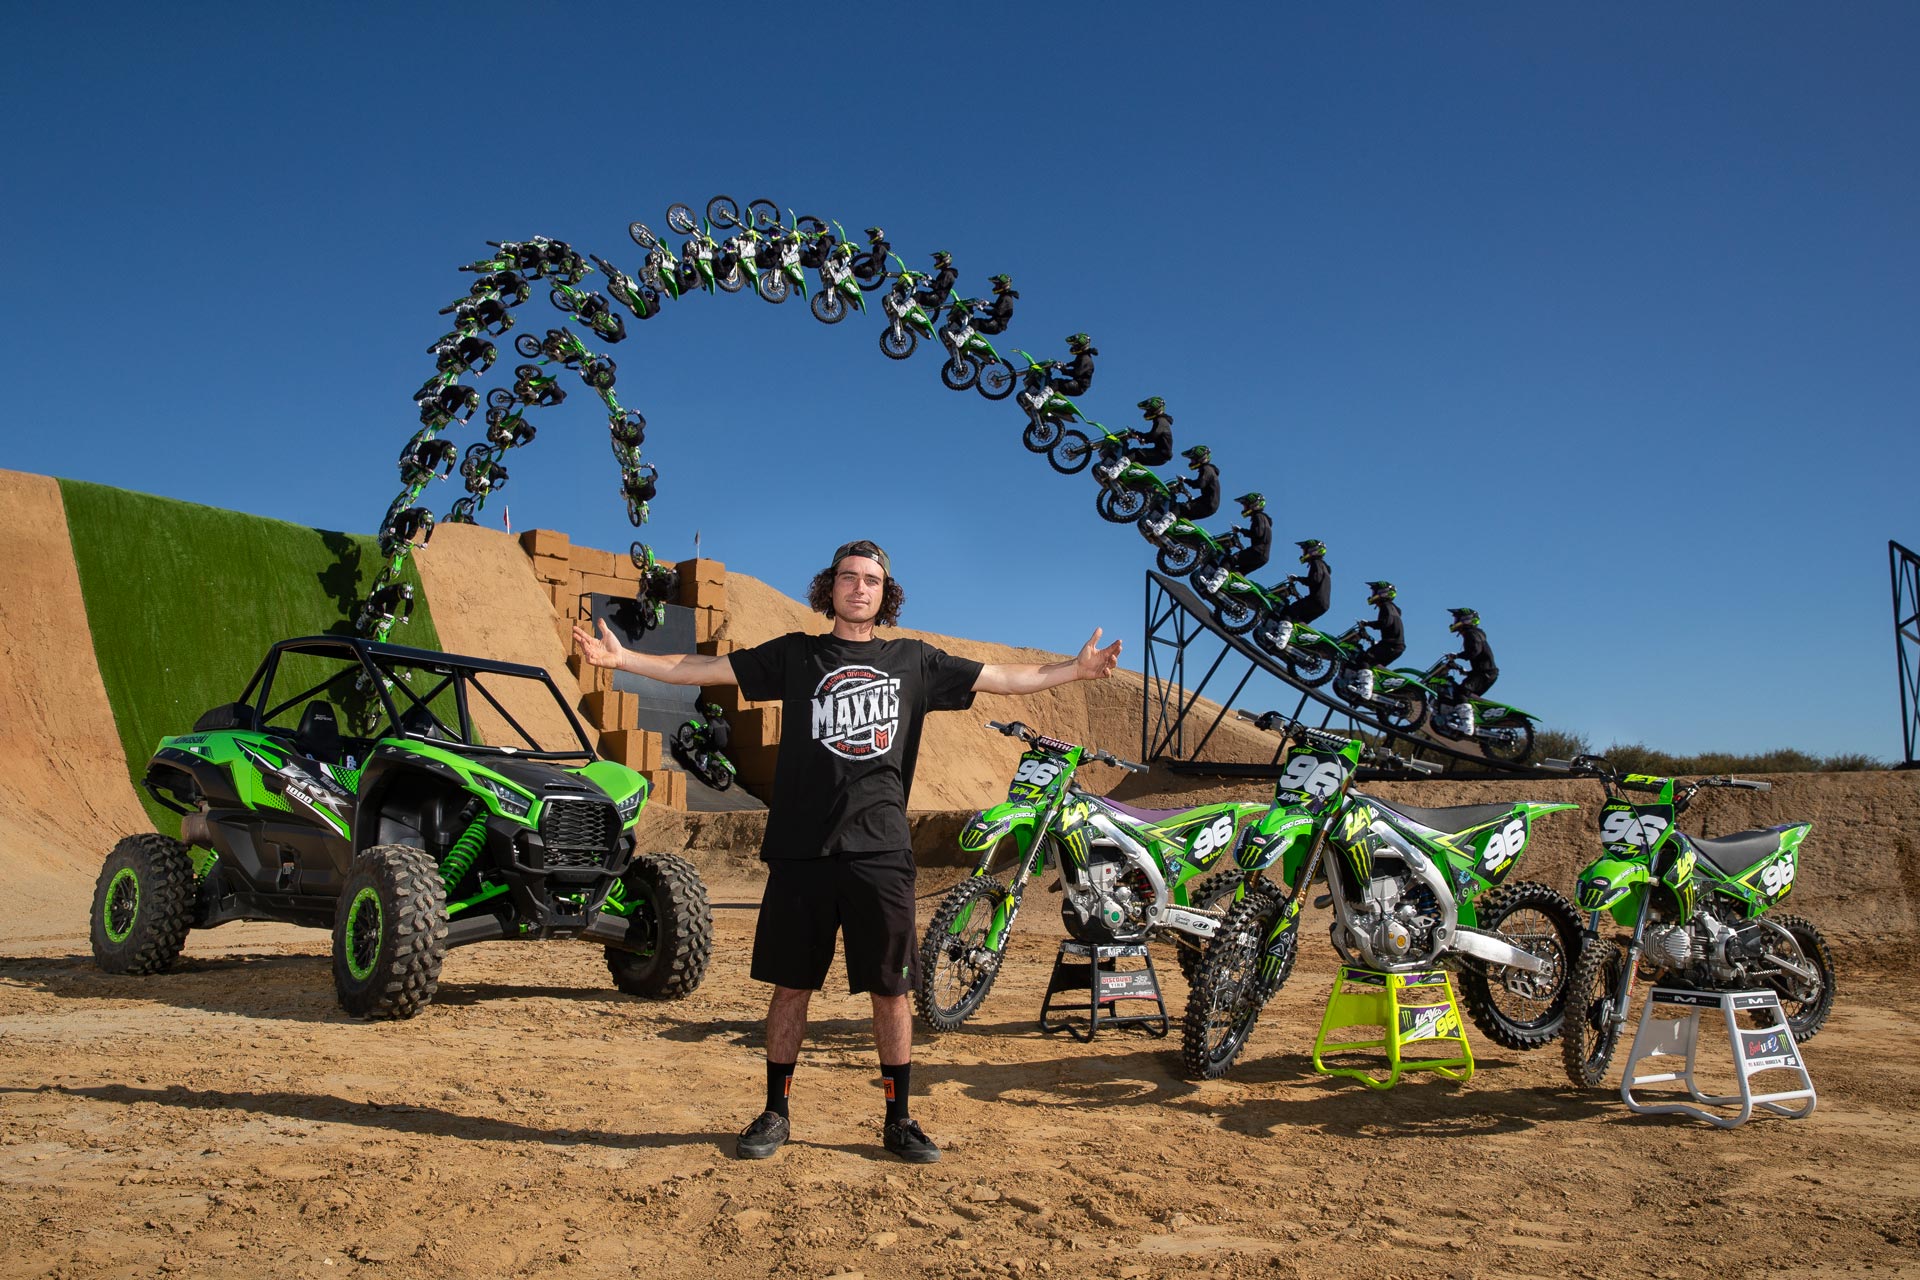 Multi-frame action sequence image of Axell Hodges ramp jumping on his Kawasaki KX250 riding Maxxcross MX-ST tires